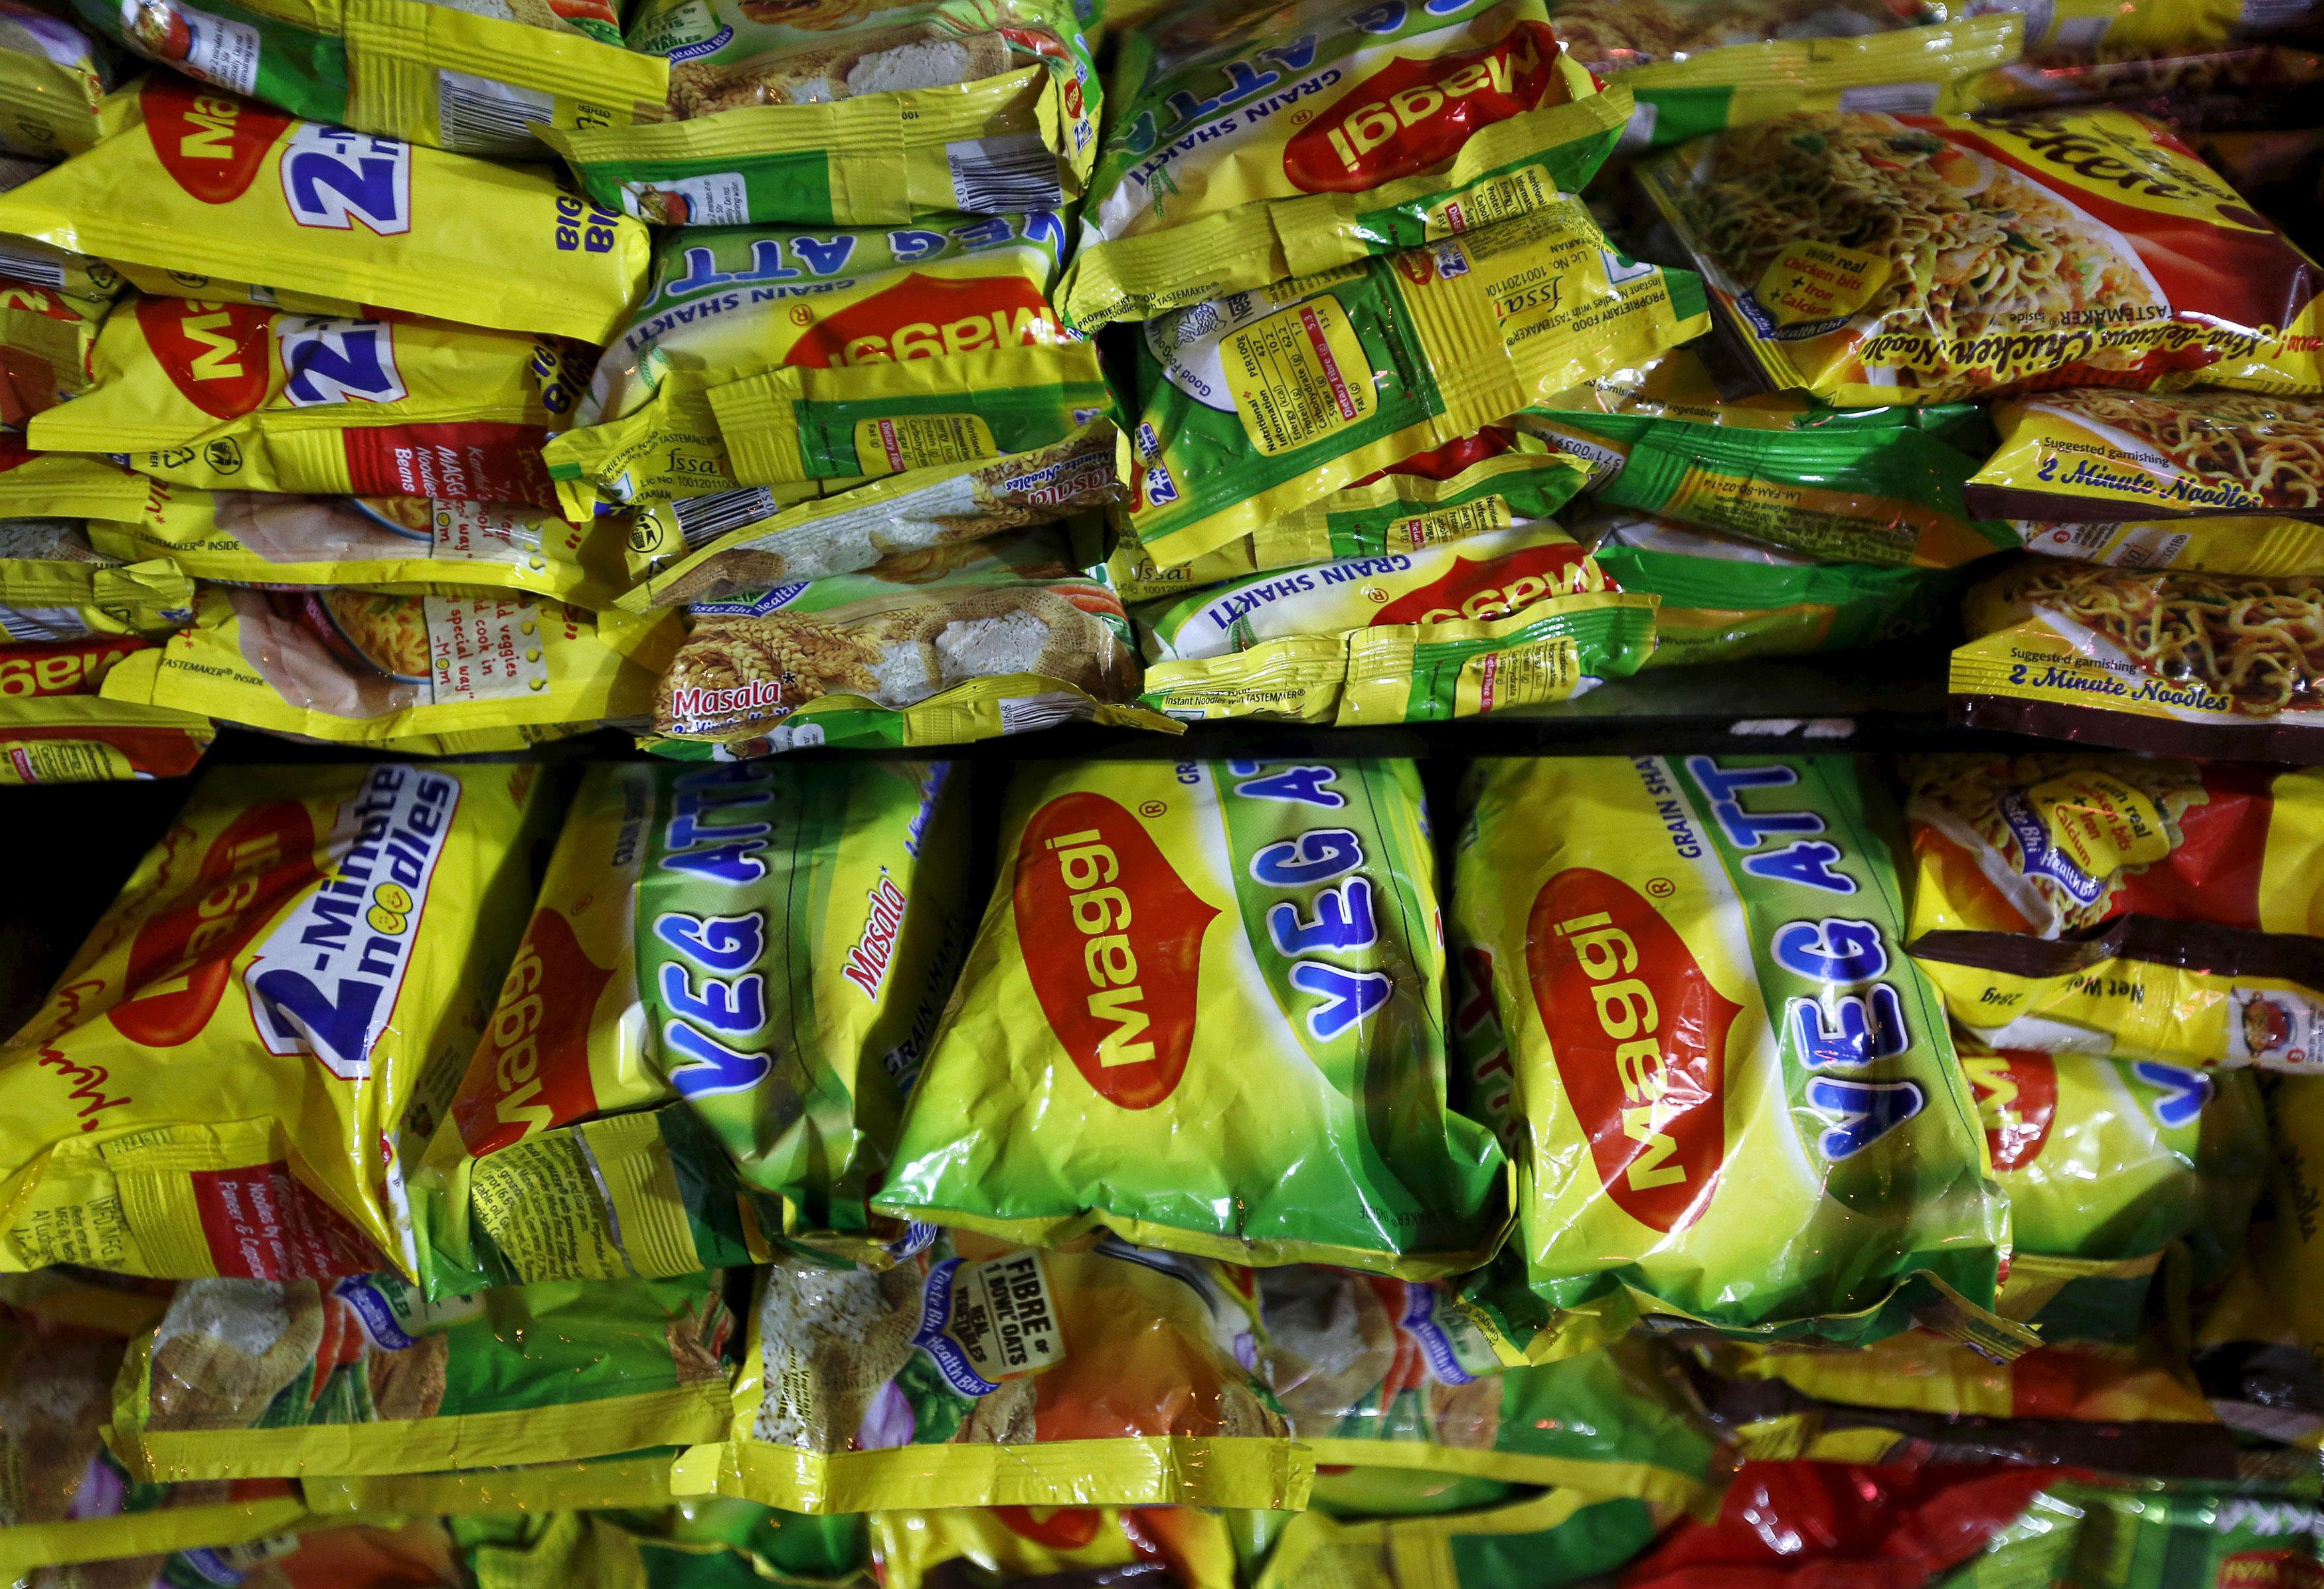 Govt files $100M class action suit against Nestle on behalf of consumers in Maggi row